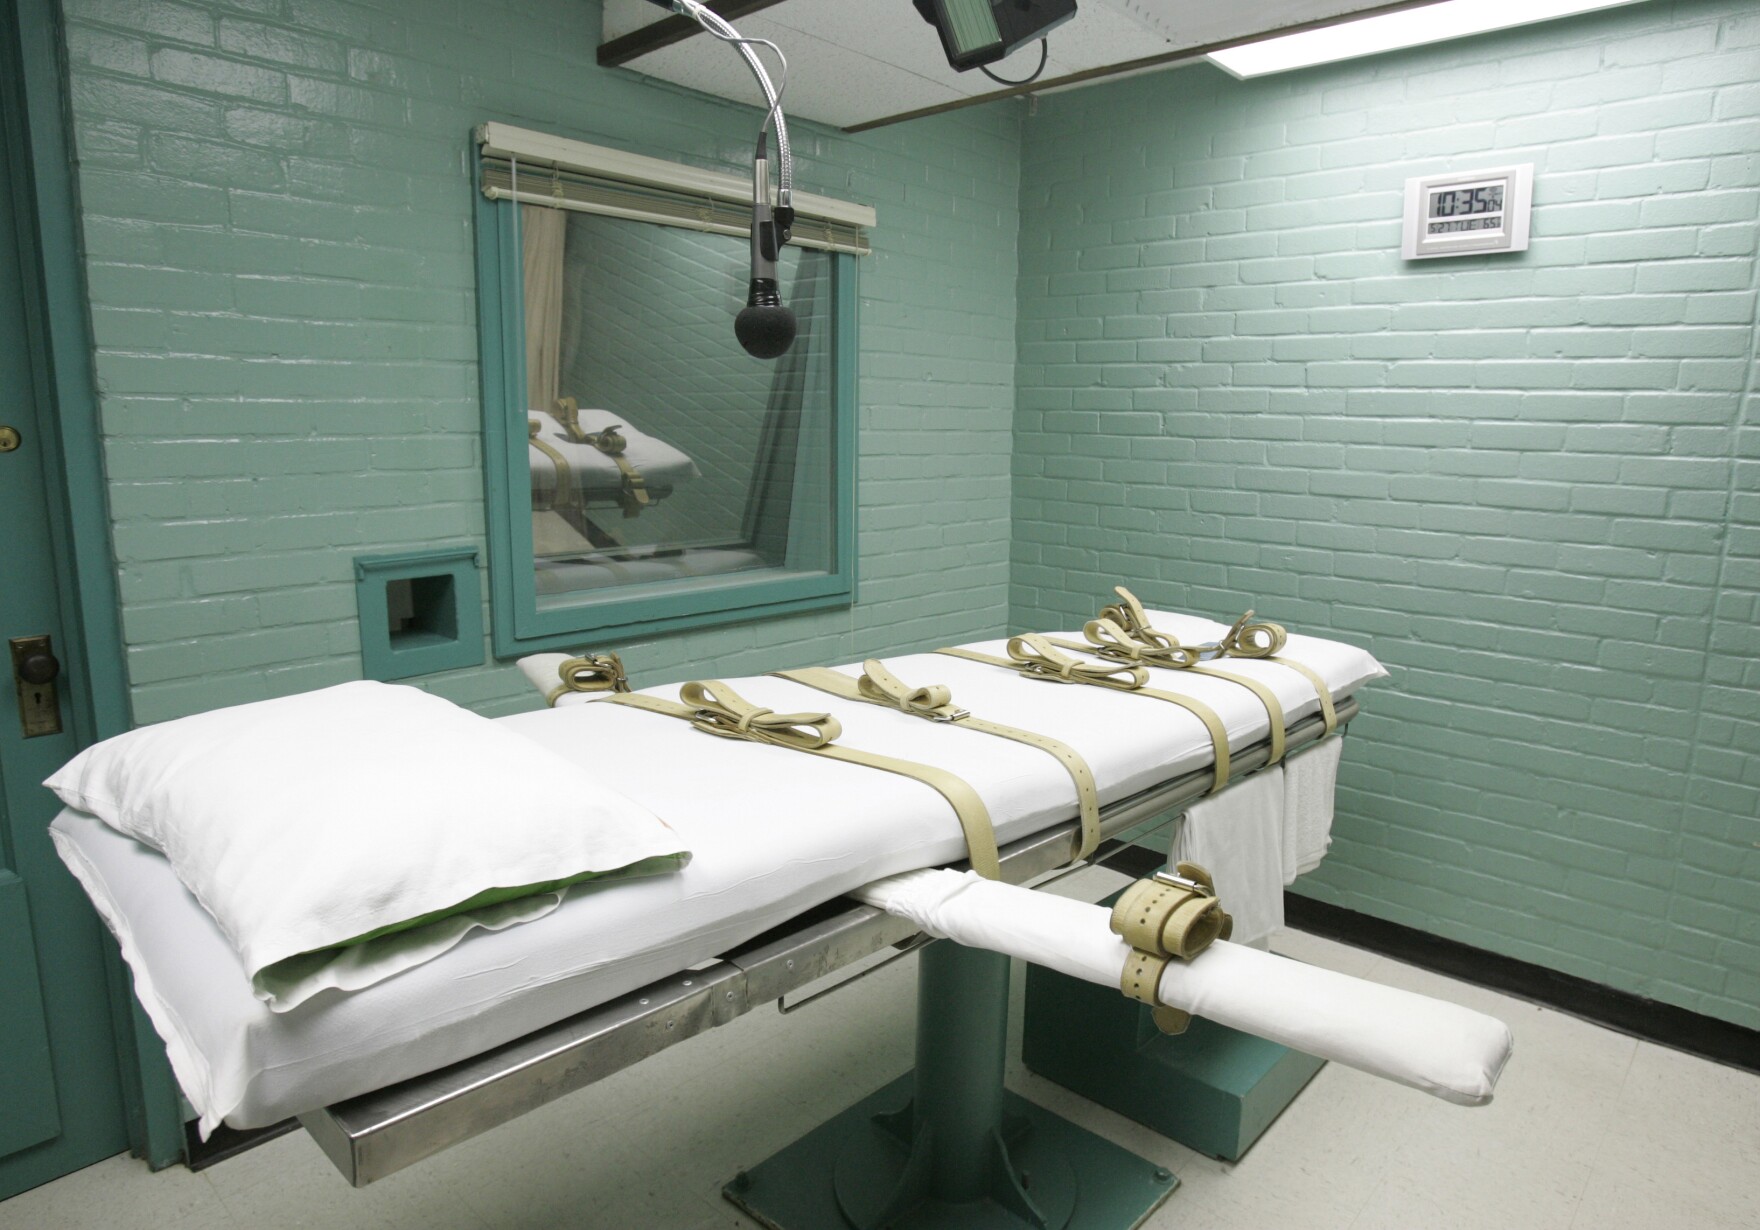 This May 27, 2008 file photo, shows an execution chamber in Huntsville, Texas.